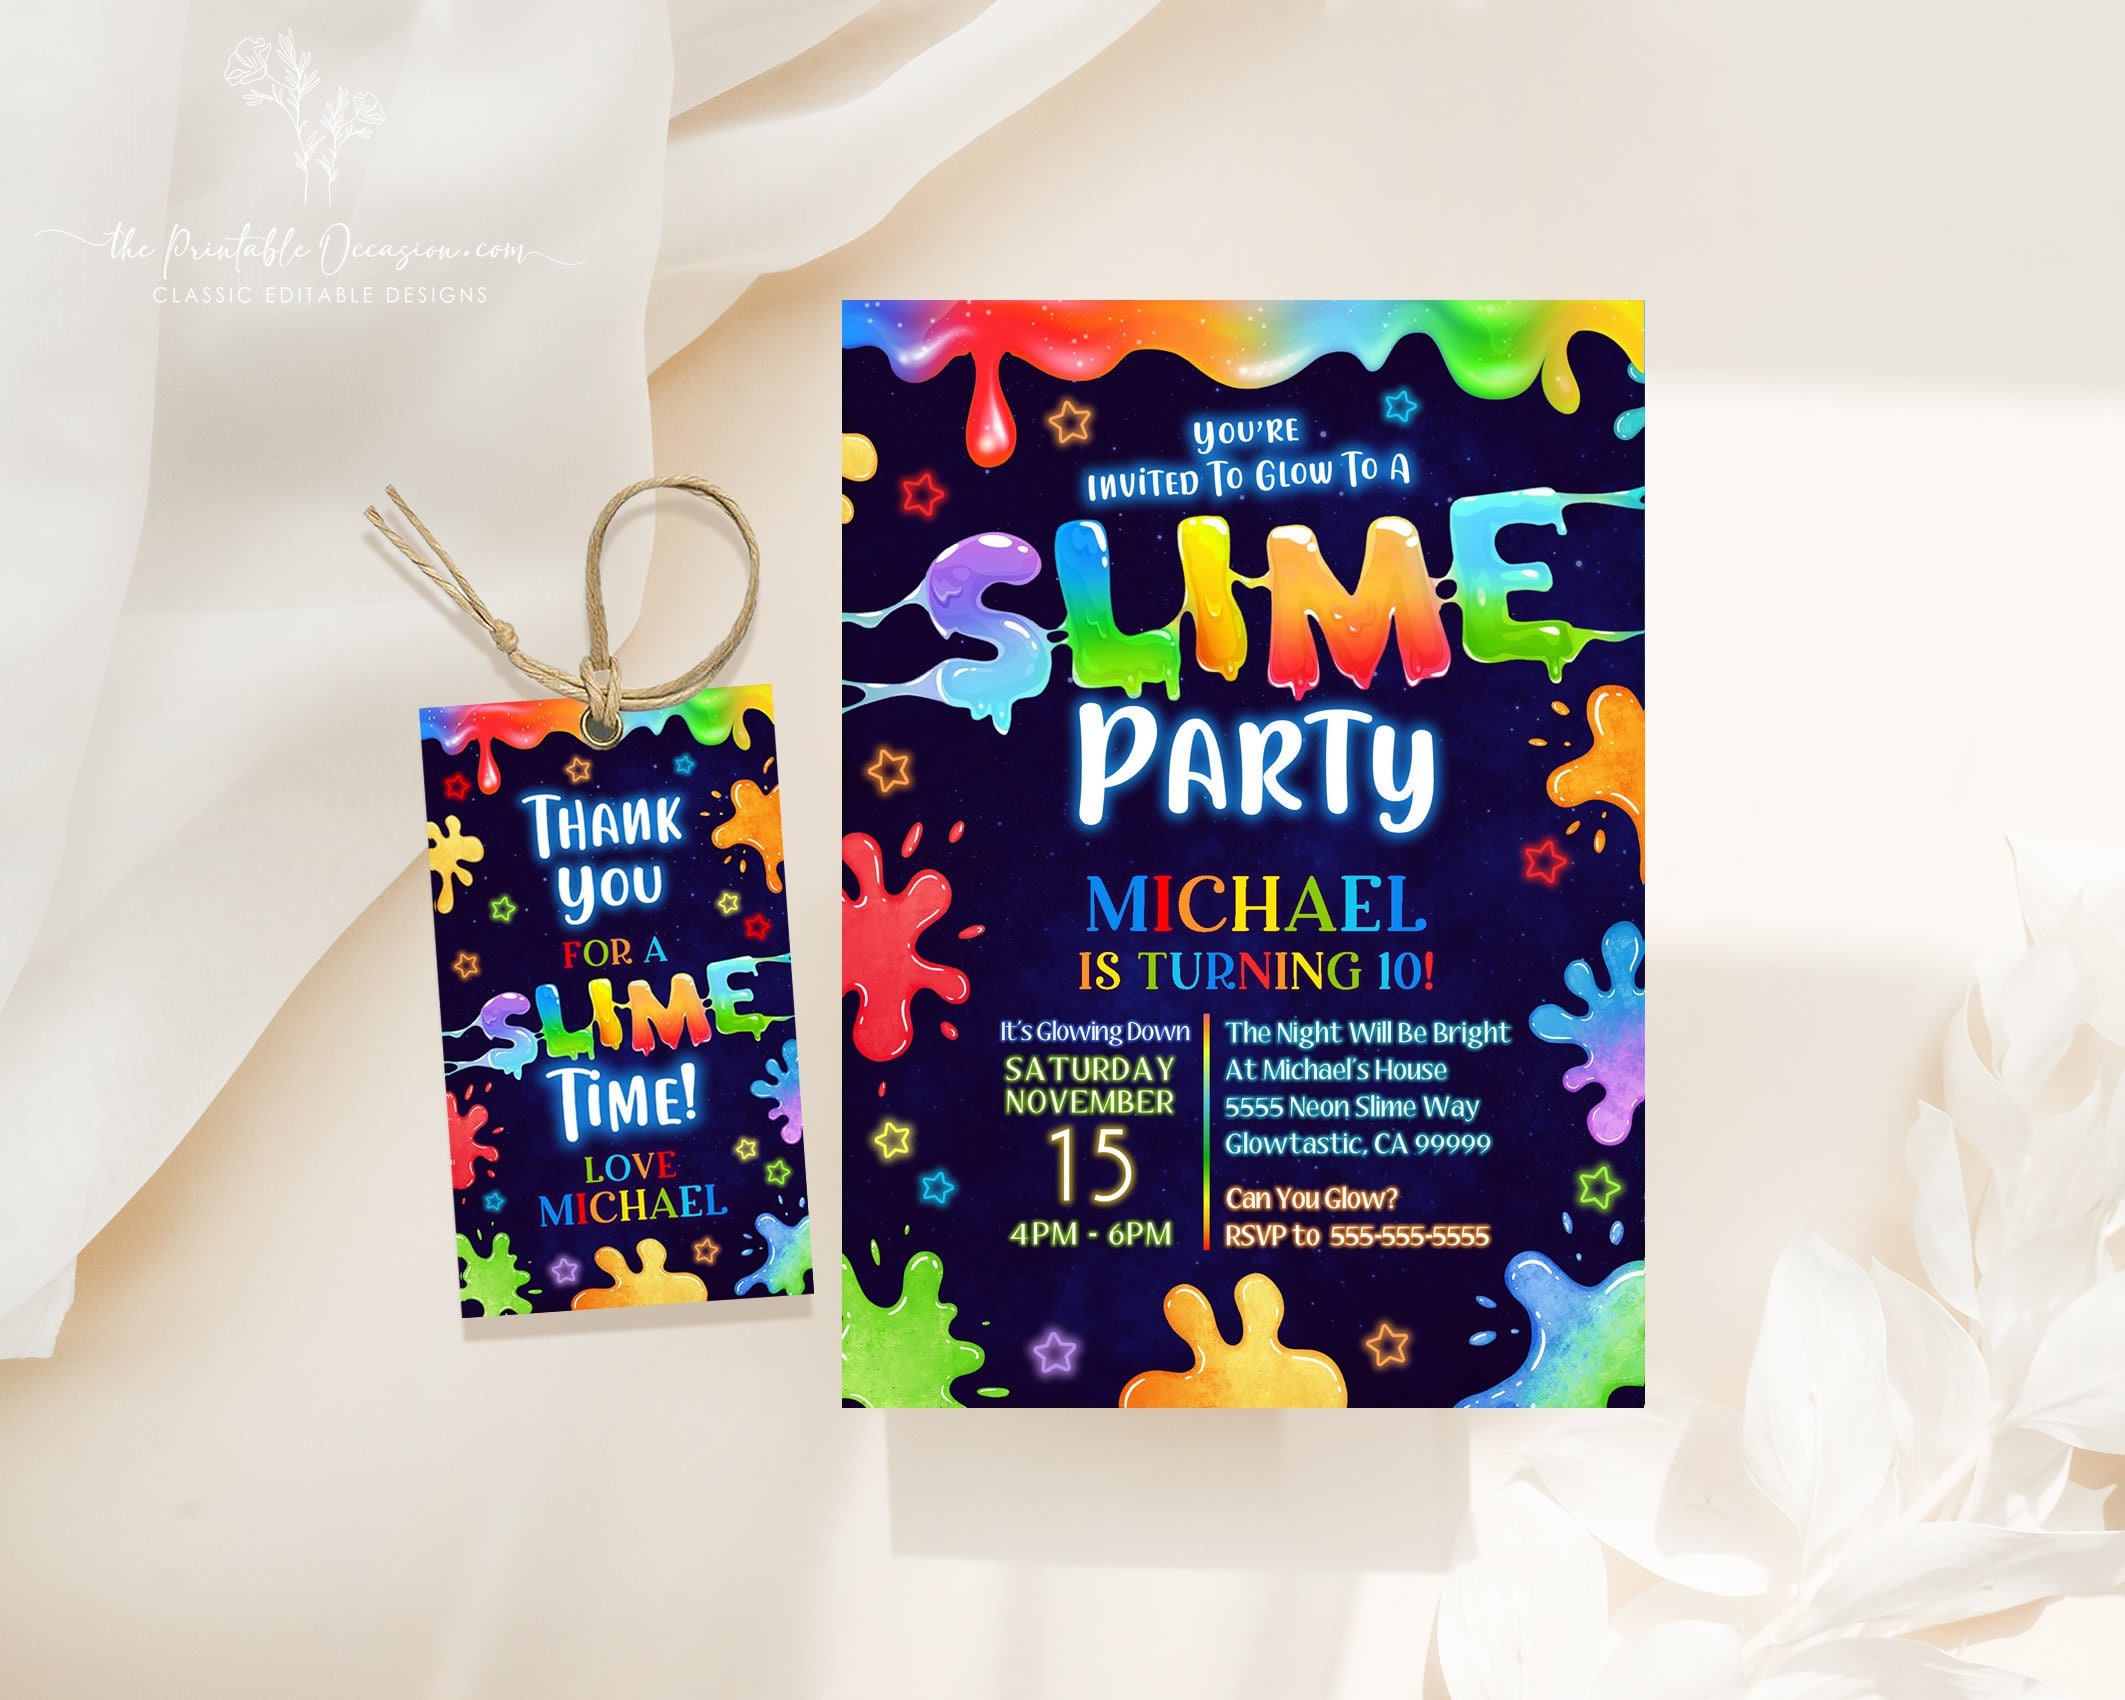 Glow Party Stickers, Glow Slime Stickers, Slime Party, Glow in the Dark  Slime, Slime Favors, Labels, Slime Favors, DIY Slime, Neon Slime 